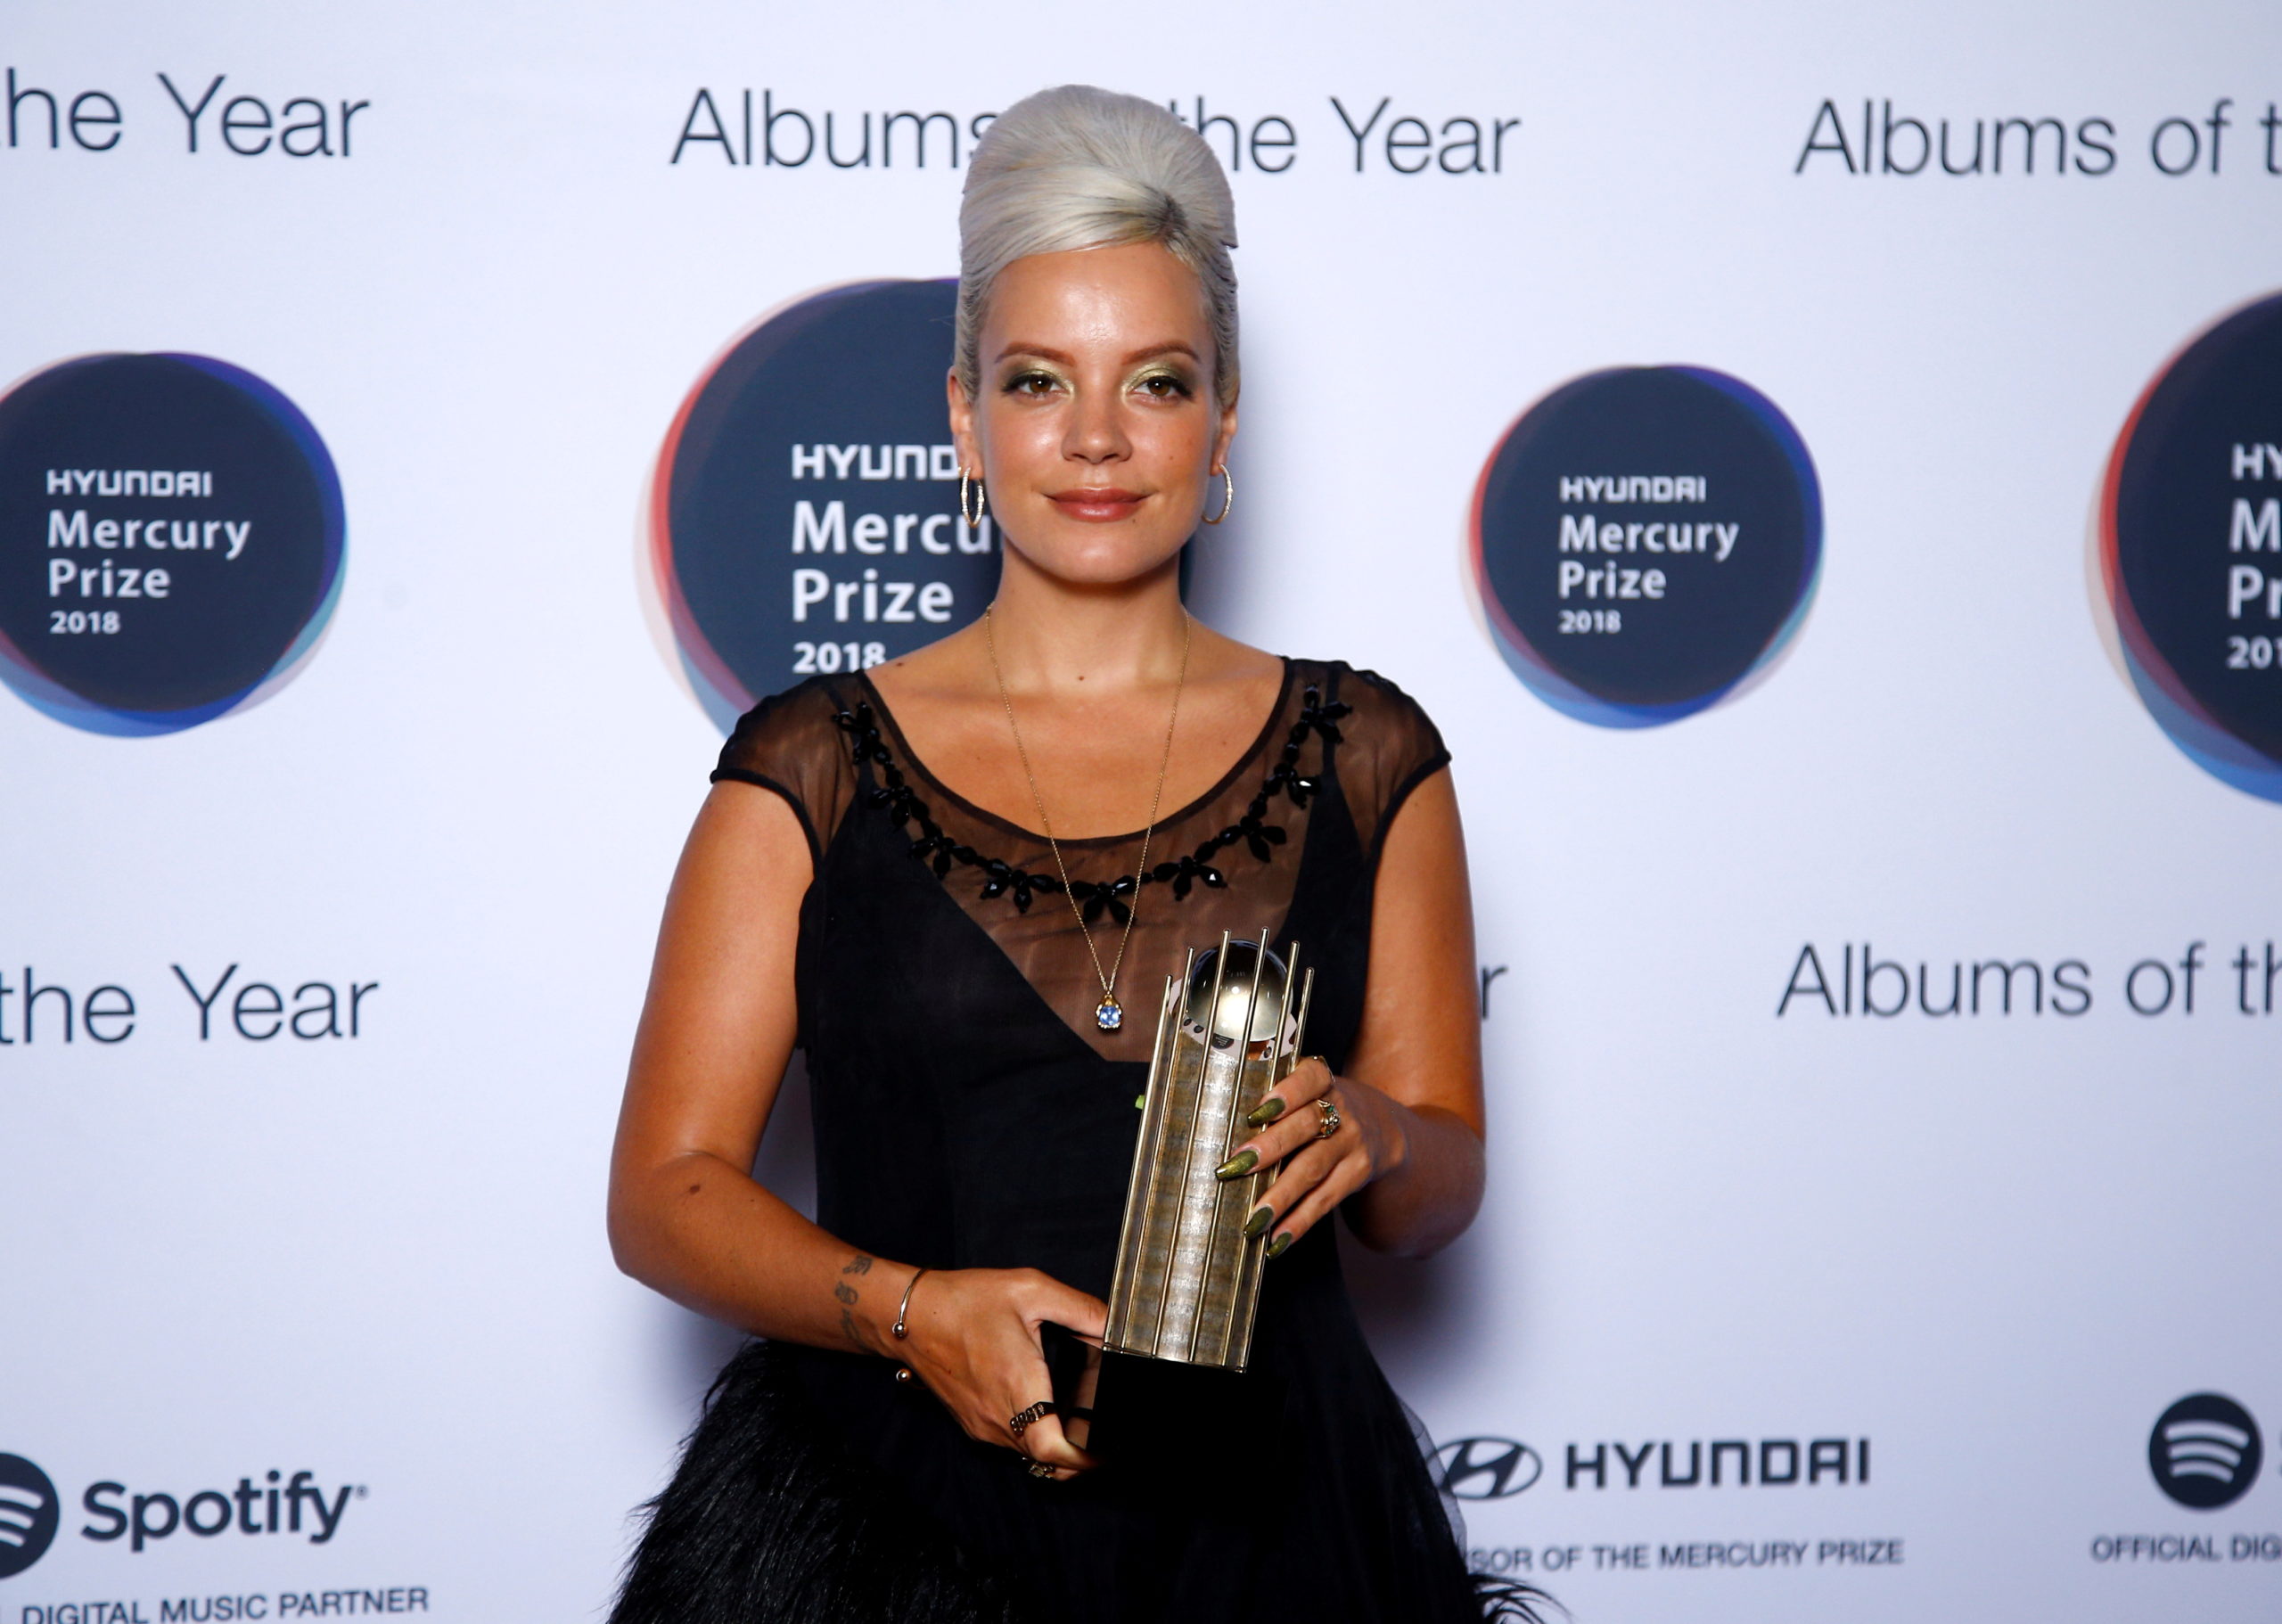 Lily Allen, whose album ‘No Shame’ has been nominated for the Mercury Prize 2018, poses for a photograph ahead of the ceremony at the Hammersmith Apollo in London, Britain.